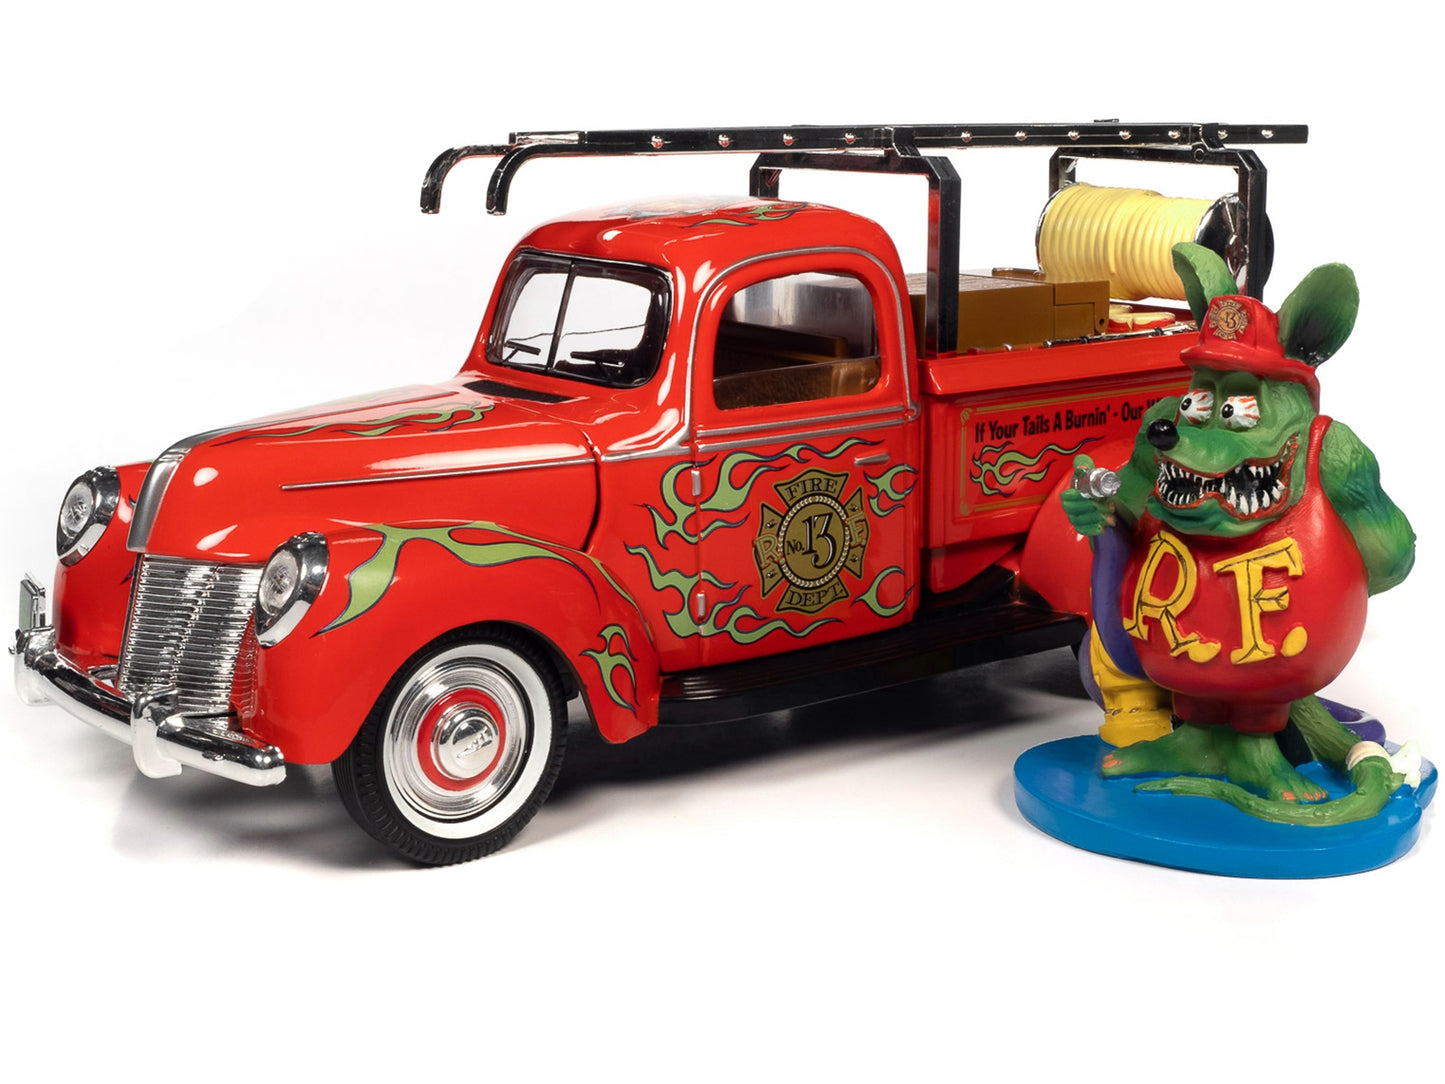 "Rat Fink" Fire Engine Truck Red with Graphics and Rat Fink Firefighter Resin Figure 1/18 Diecast Model Car by Auto World